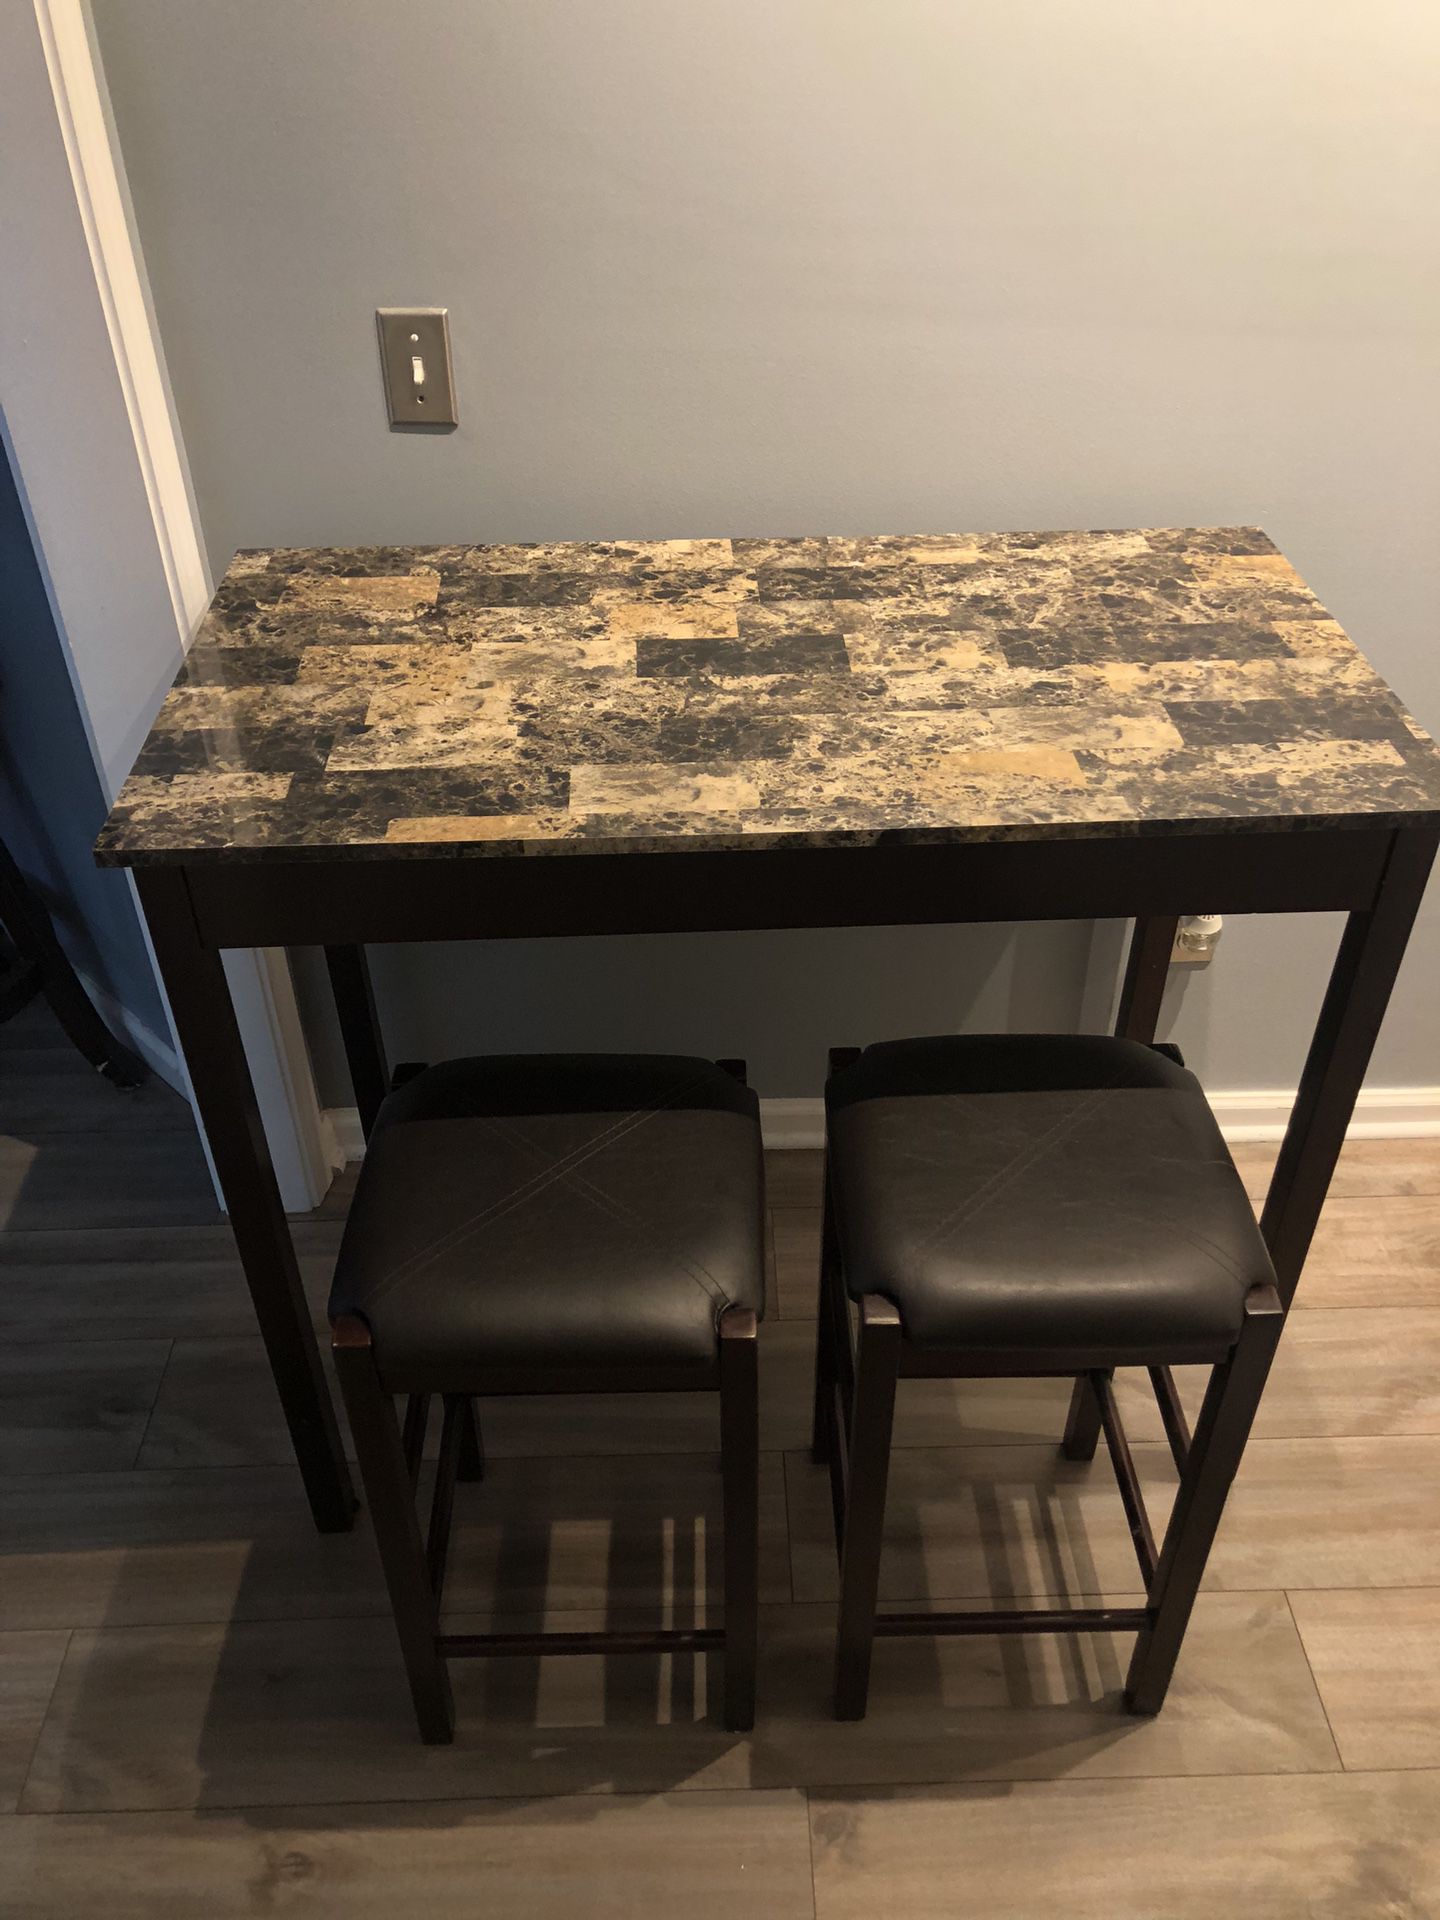 Small Area Kitchen Table